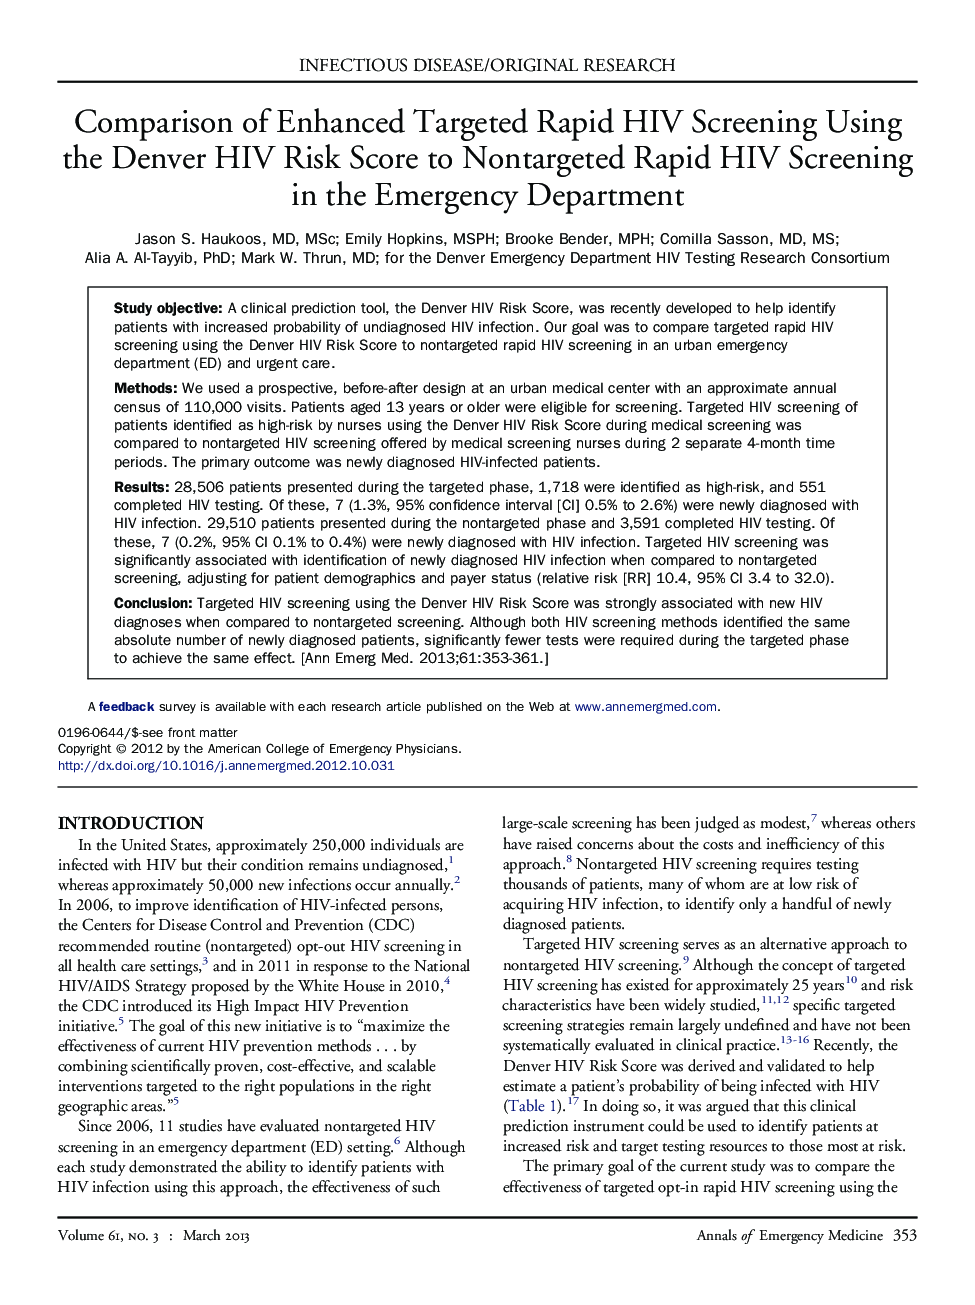 Comparison of Enhanced Targeted Rapid HIV Screening Using the Denver HIV Risk Score to Nontargeted Rapid HIV Screening in the Emergency Department 